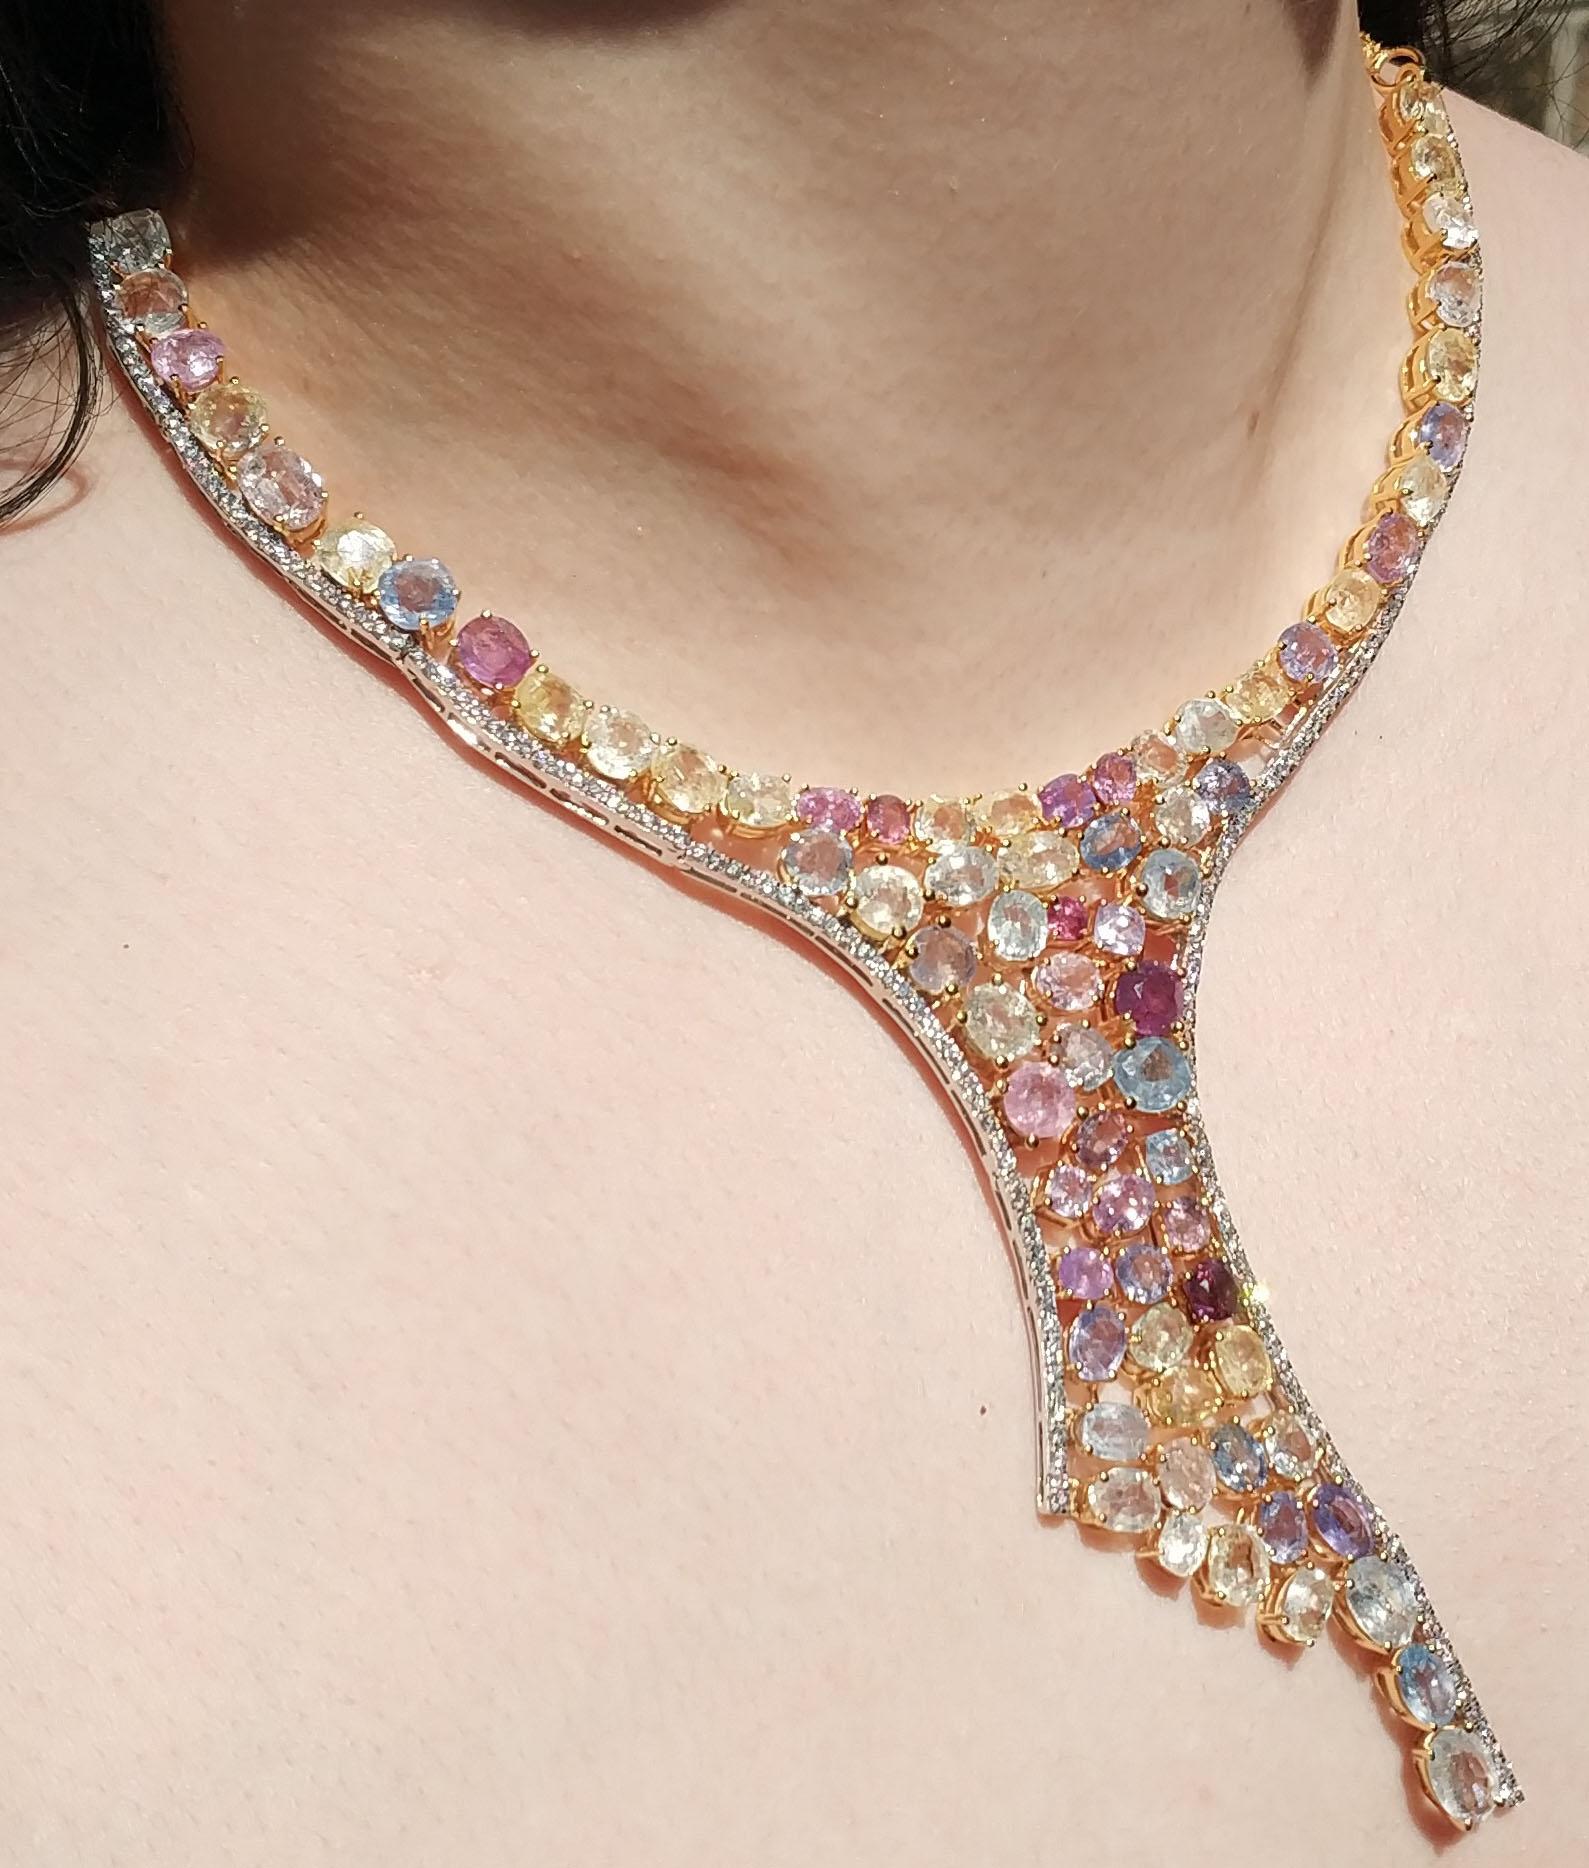 113 Carat Multicolored Sapphire and Diamond Necklace in Hourglass Design For Sale 1